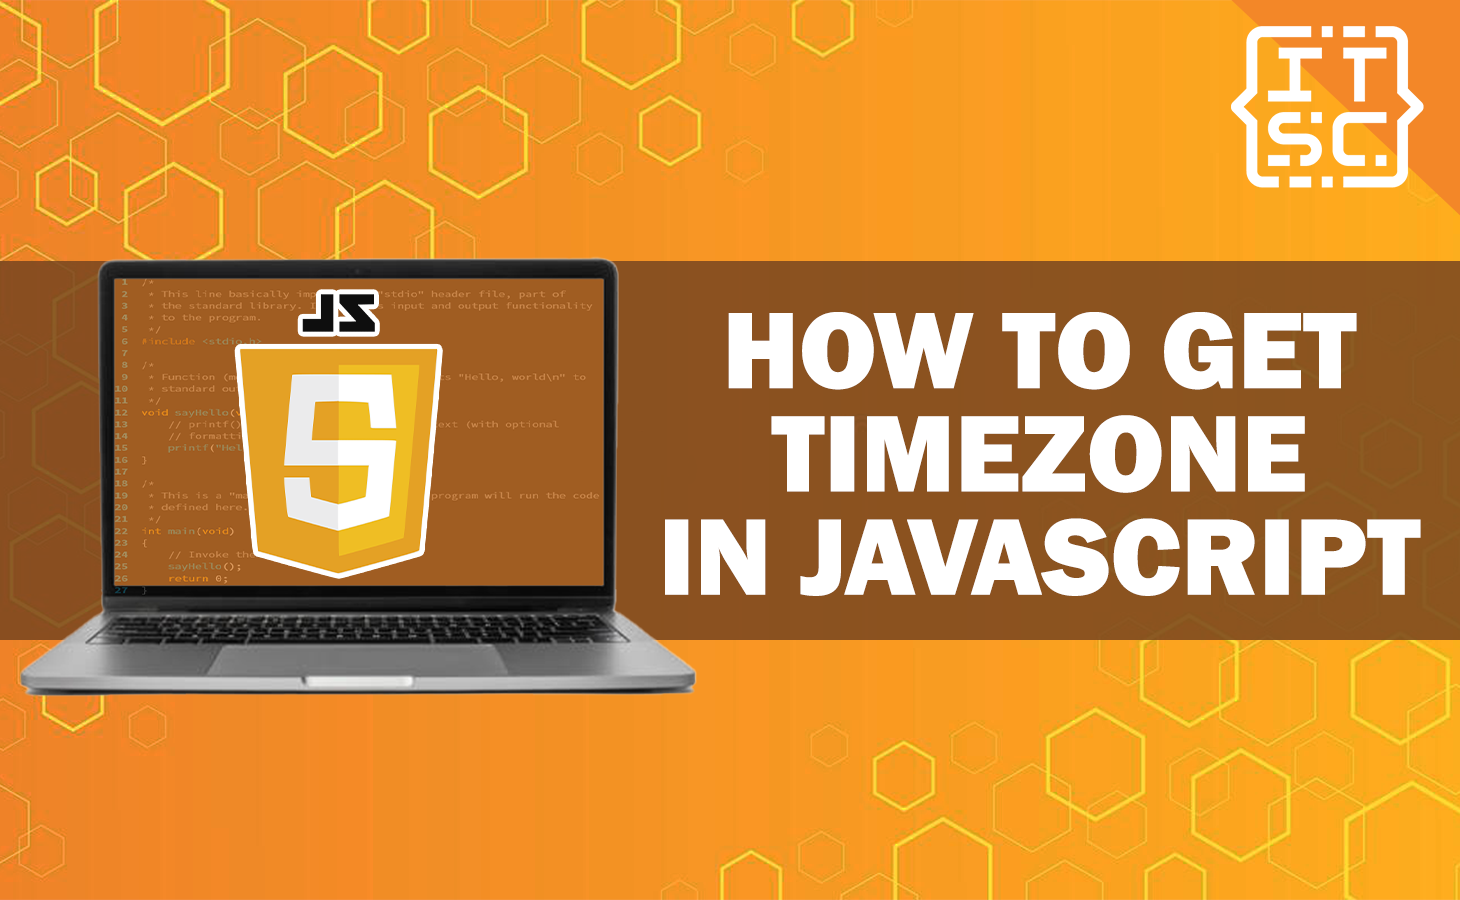 How to Get Timezone in JavaScript